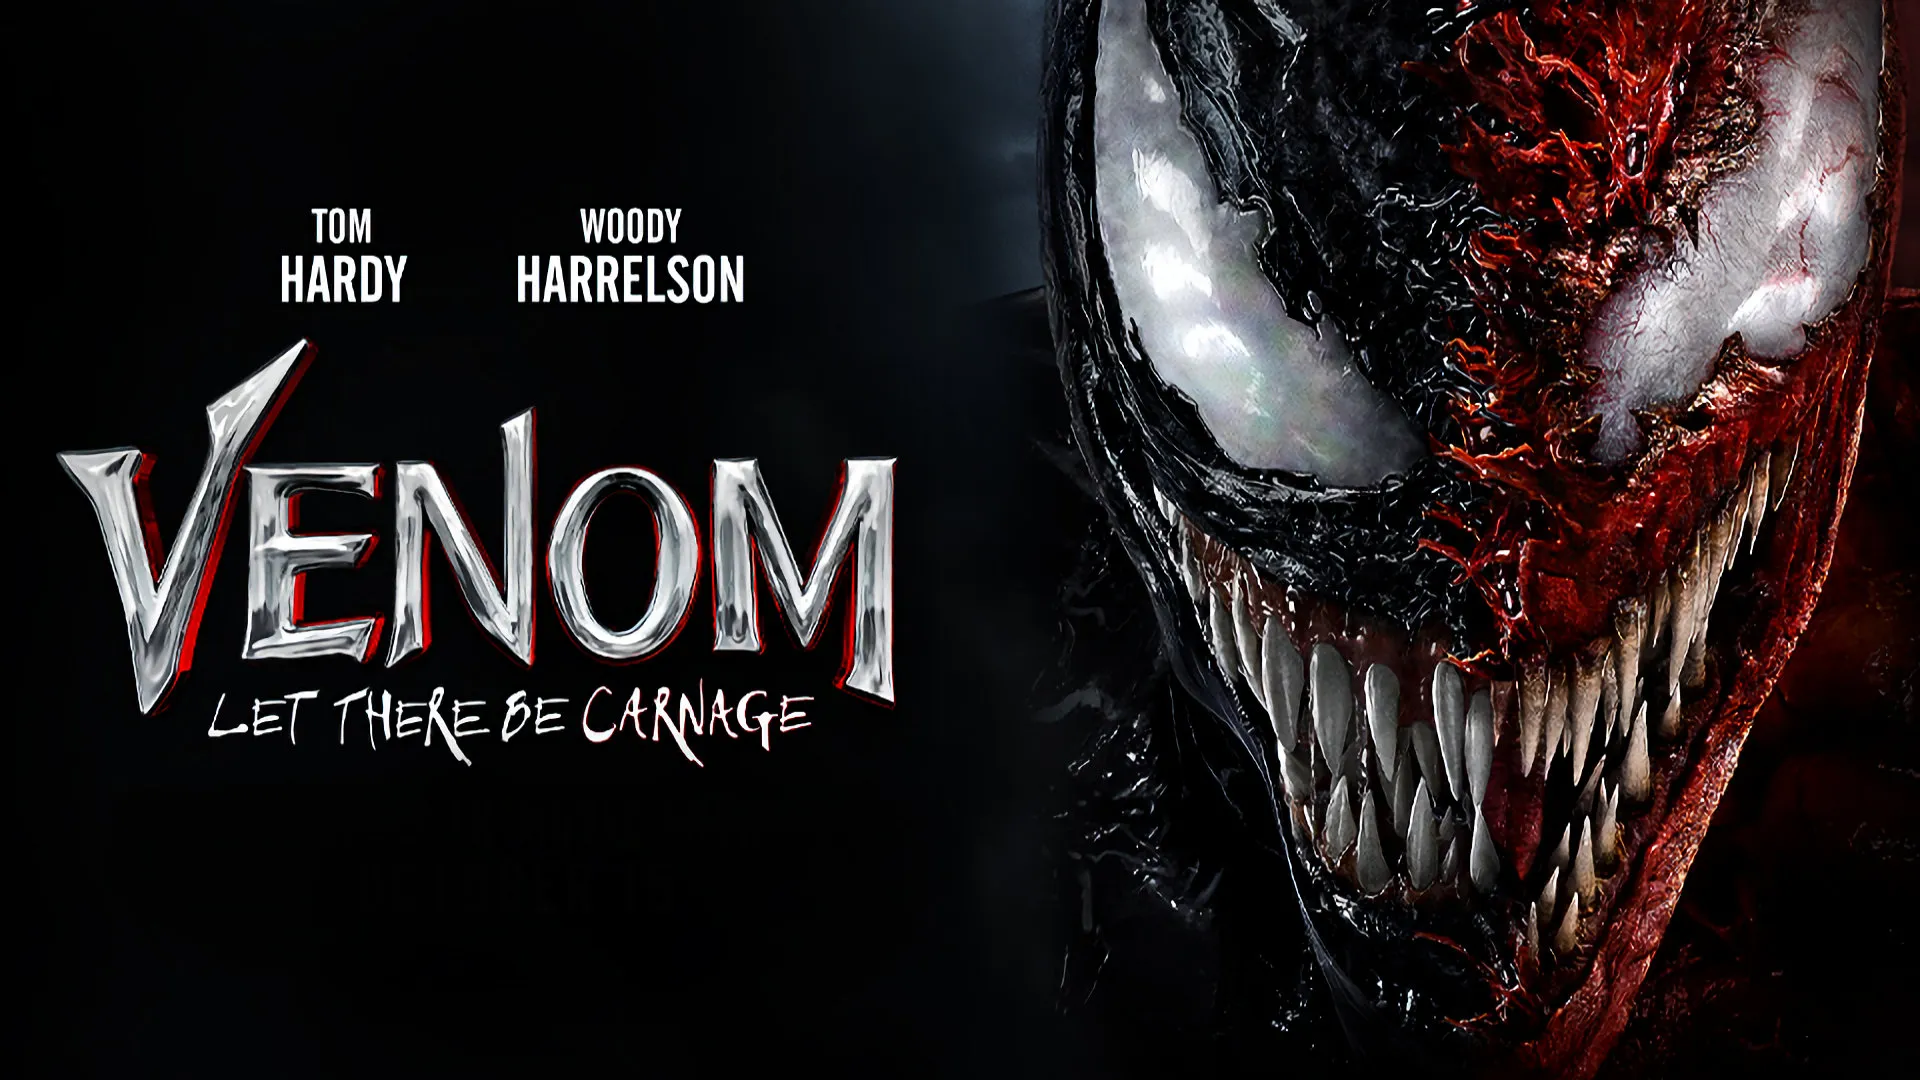 Venom Let There BE Carnage banner